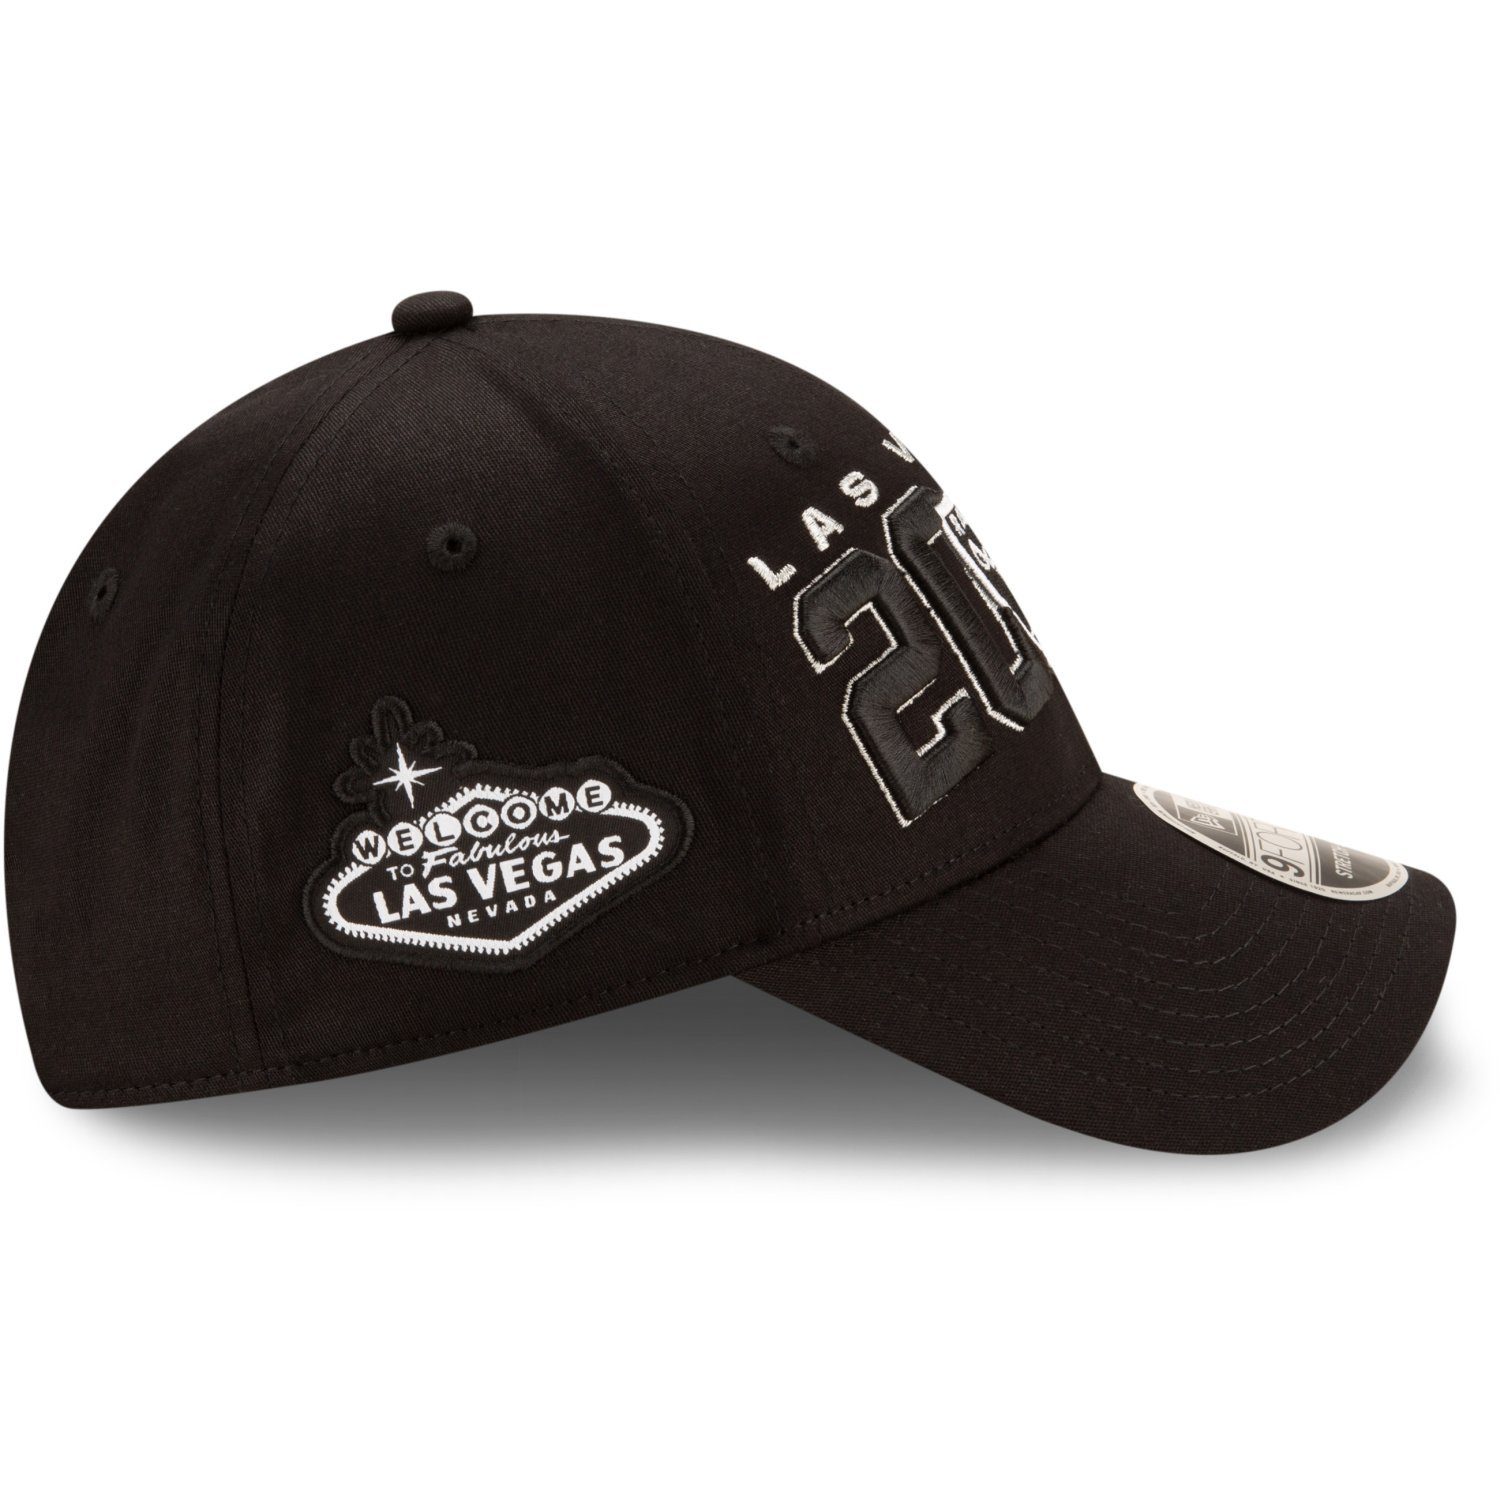 Raiders Stretch Era Cap Fitted 2020 9FORTY Vegas DRAFT Las New